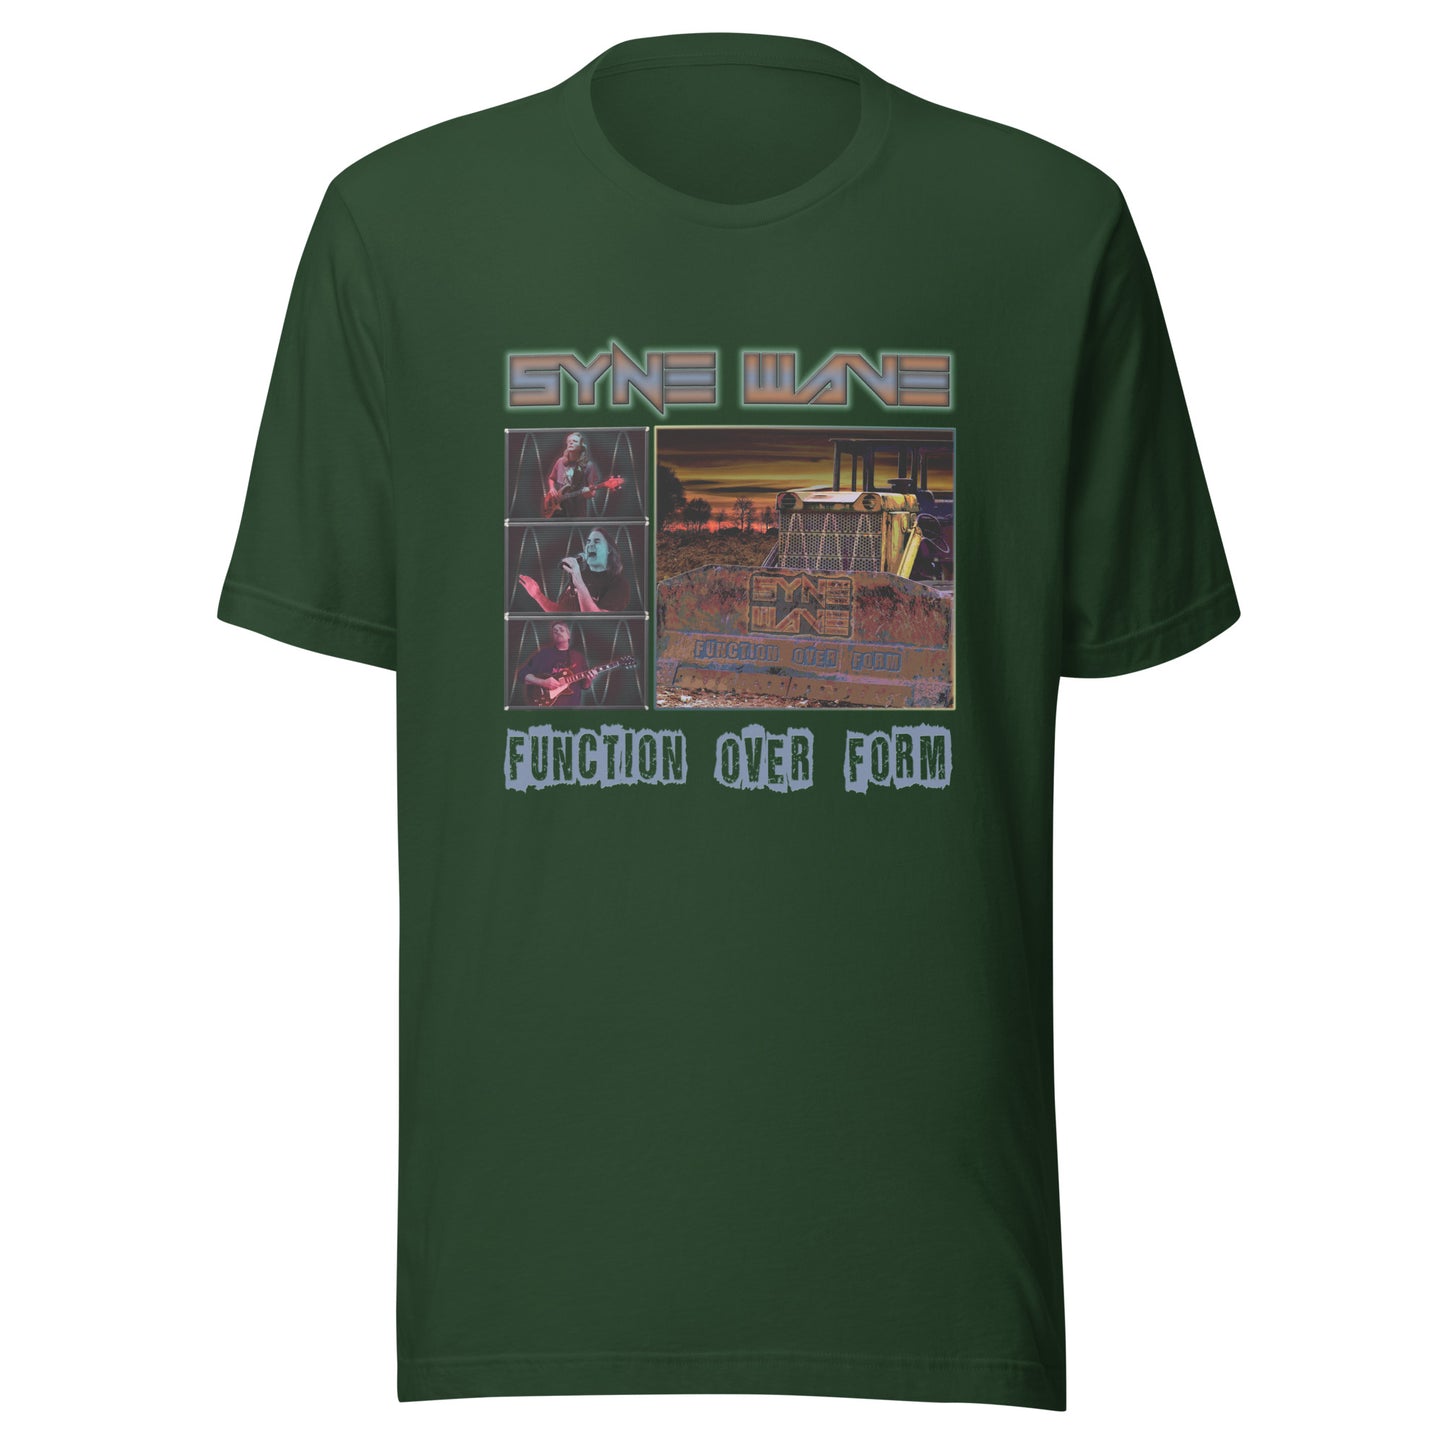 Syne Wave - Function Over Form T-Shirt